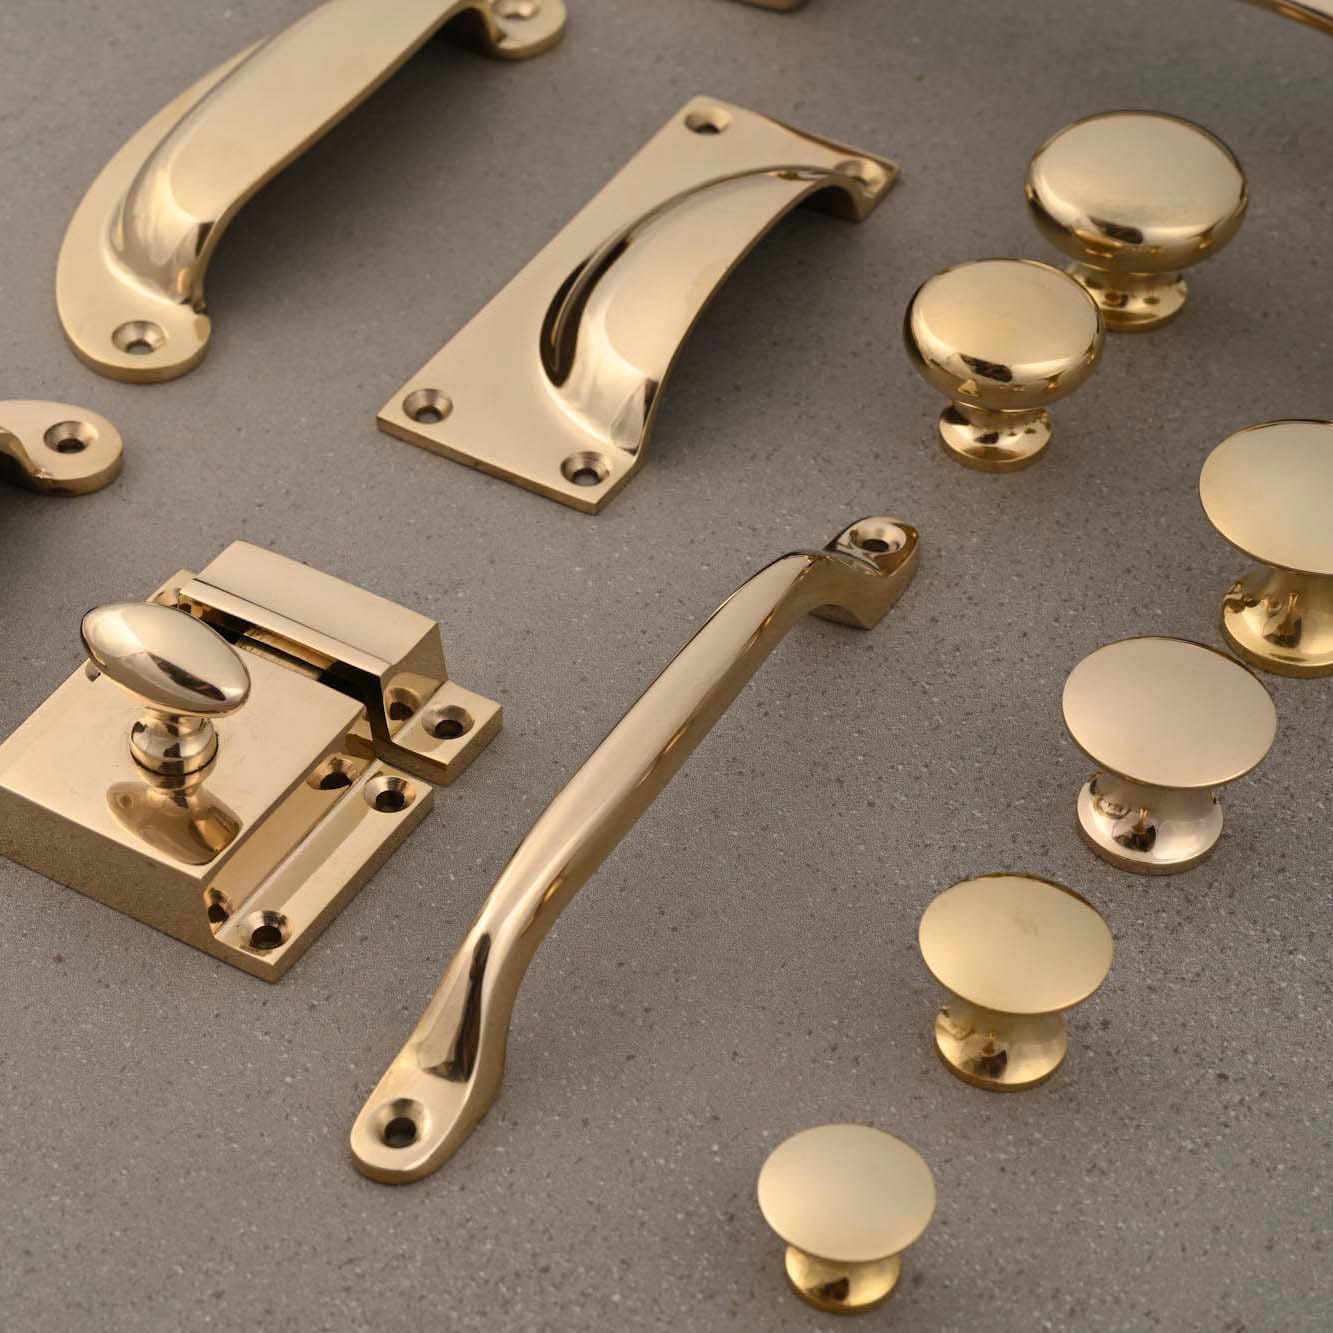 Solid Brass Kitchen Cupboard Handles and Knobs Polished Brass Cup Pulls  Handles Gold Cabinet Door Pulls